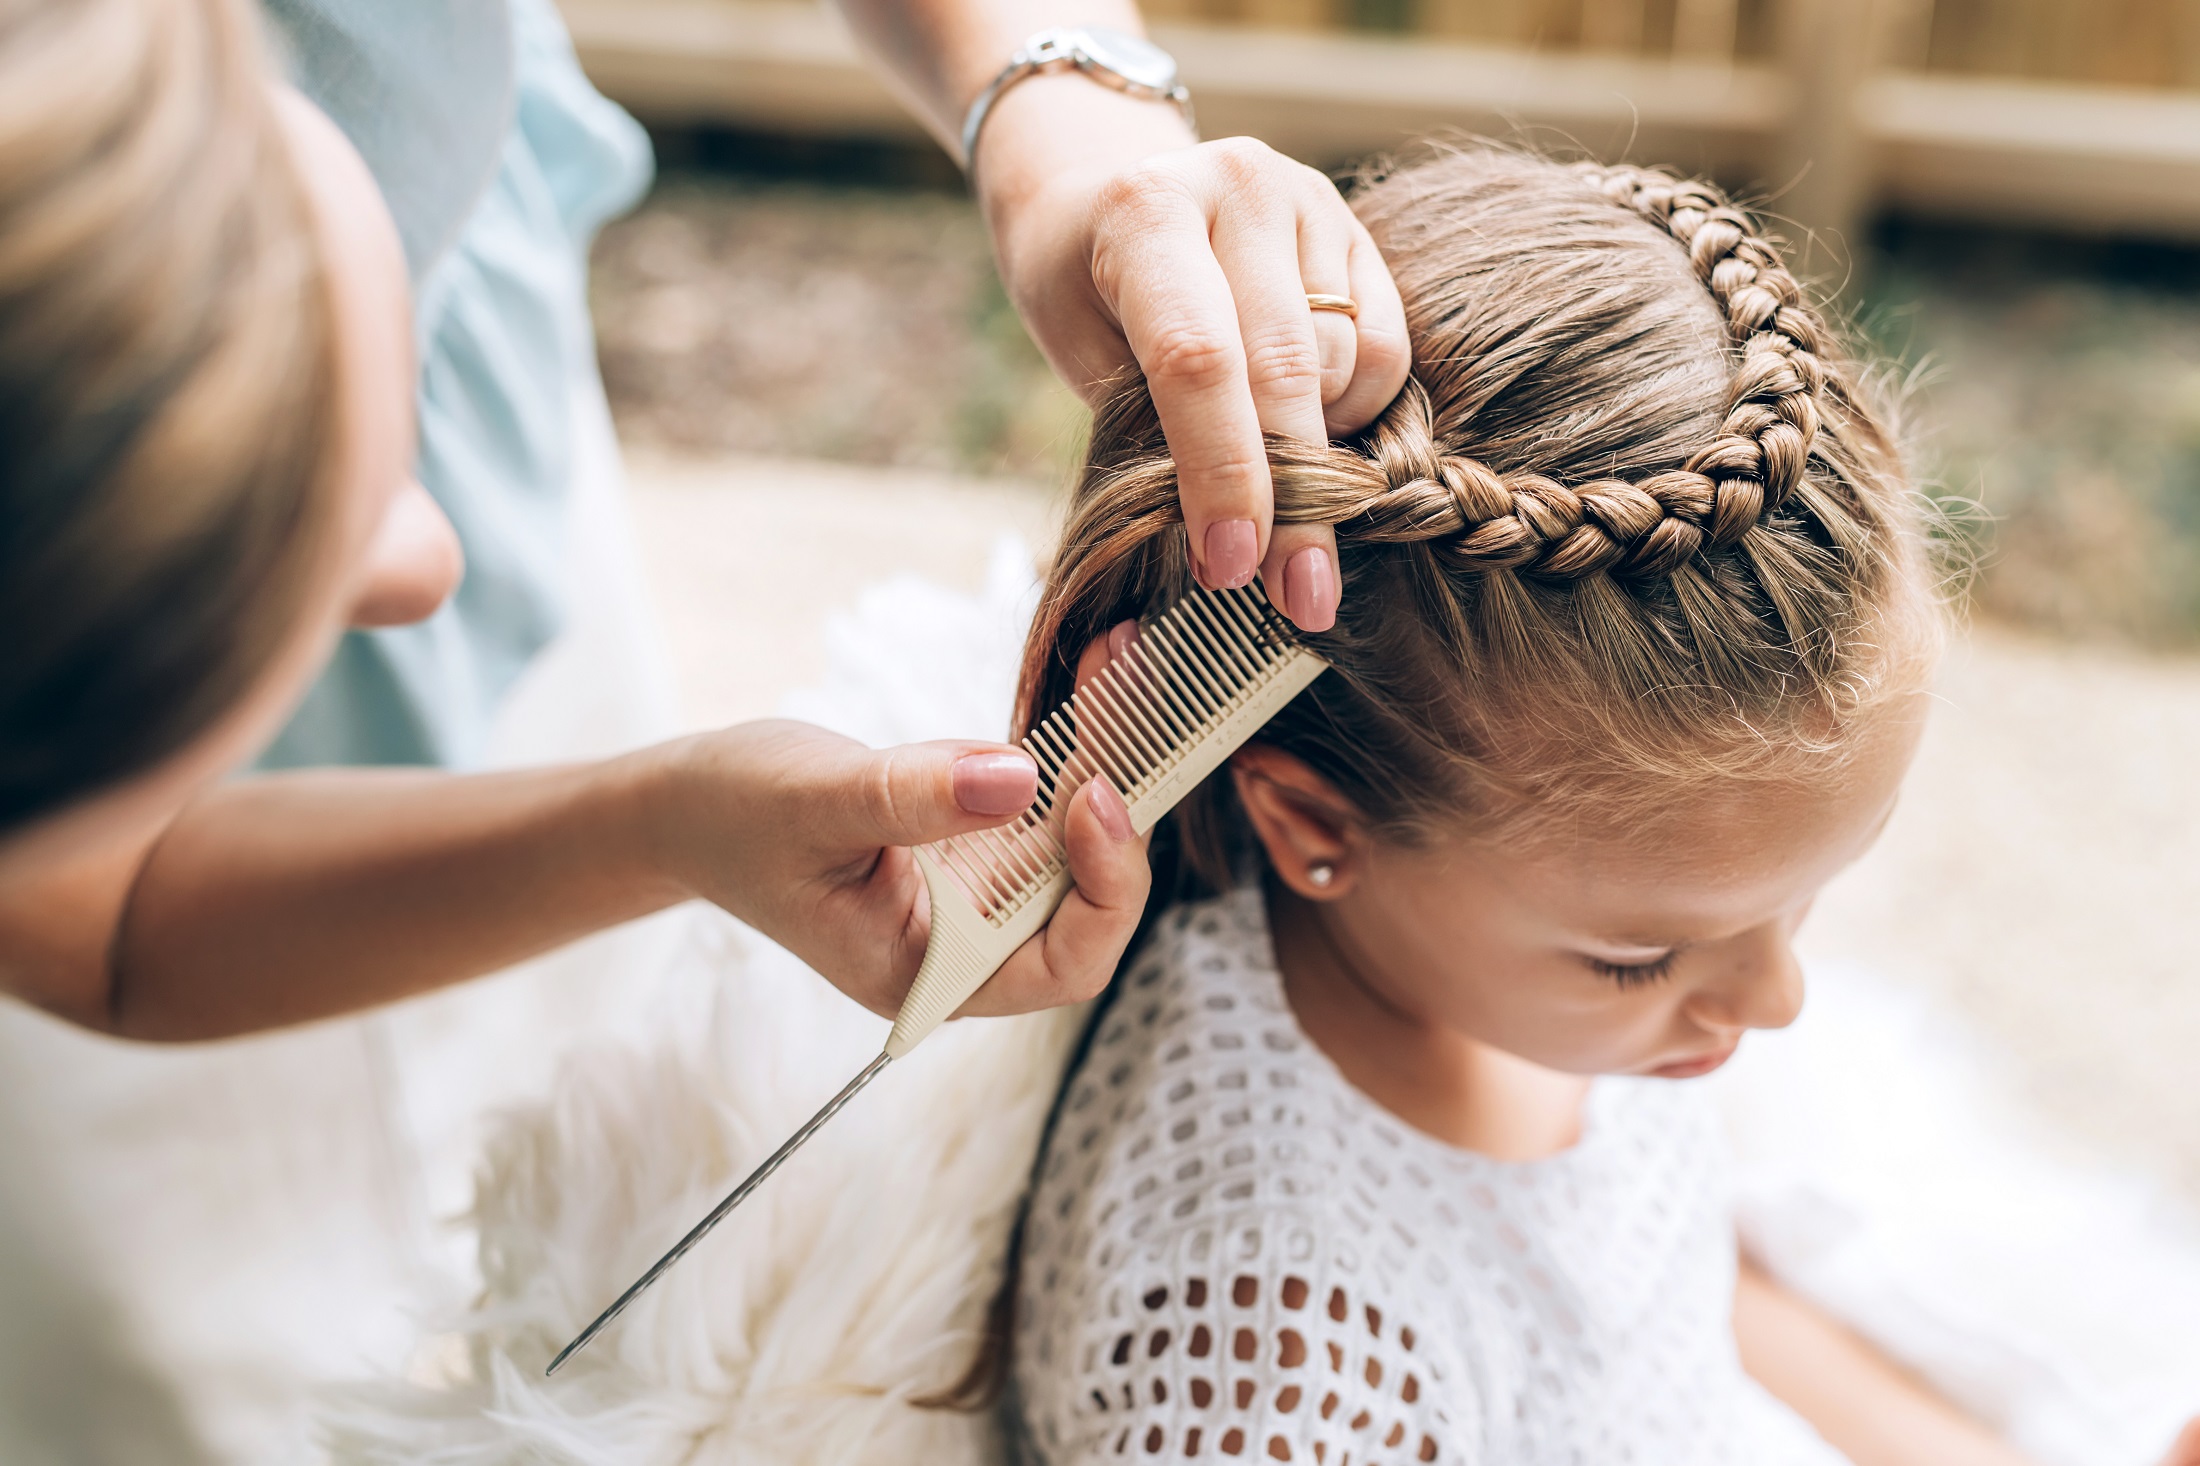 Fashionable and original hairstyles for girls that every mom can easily do